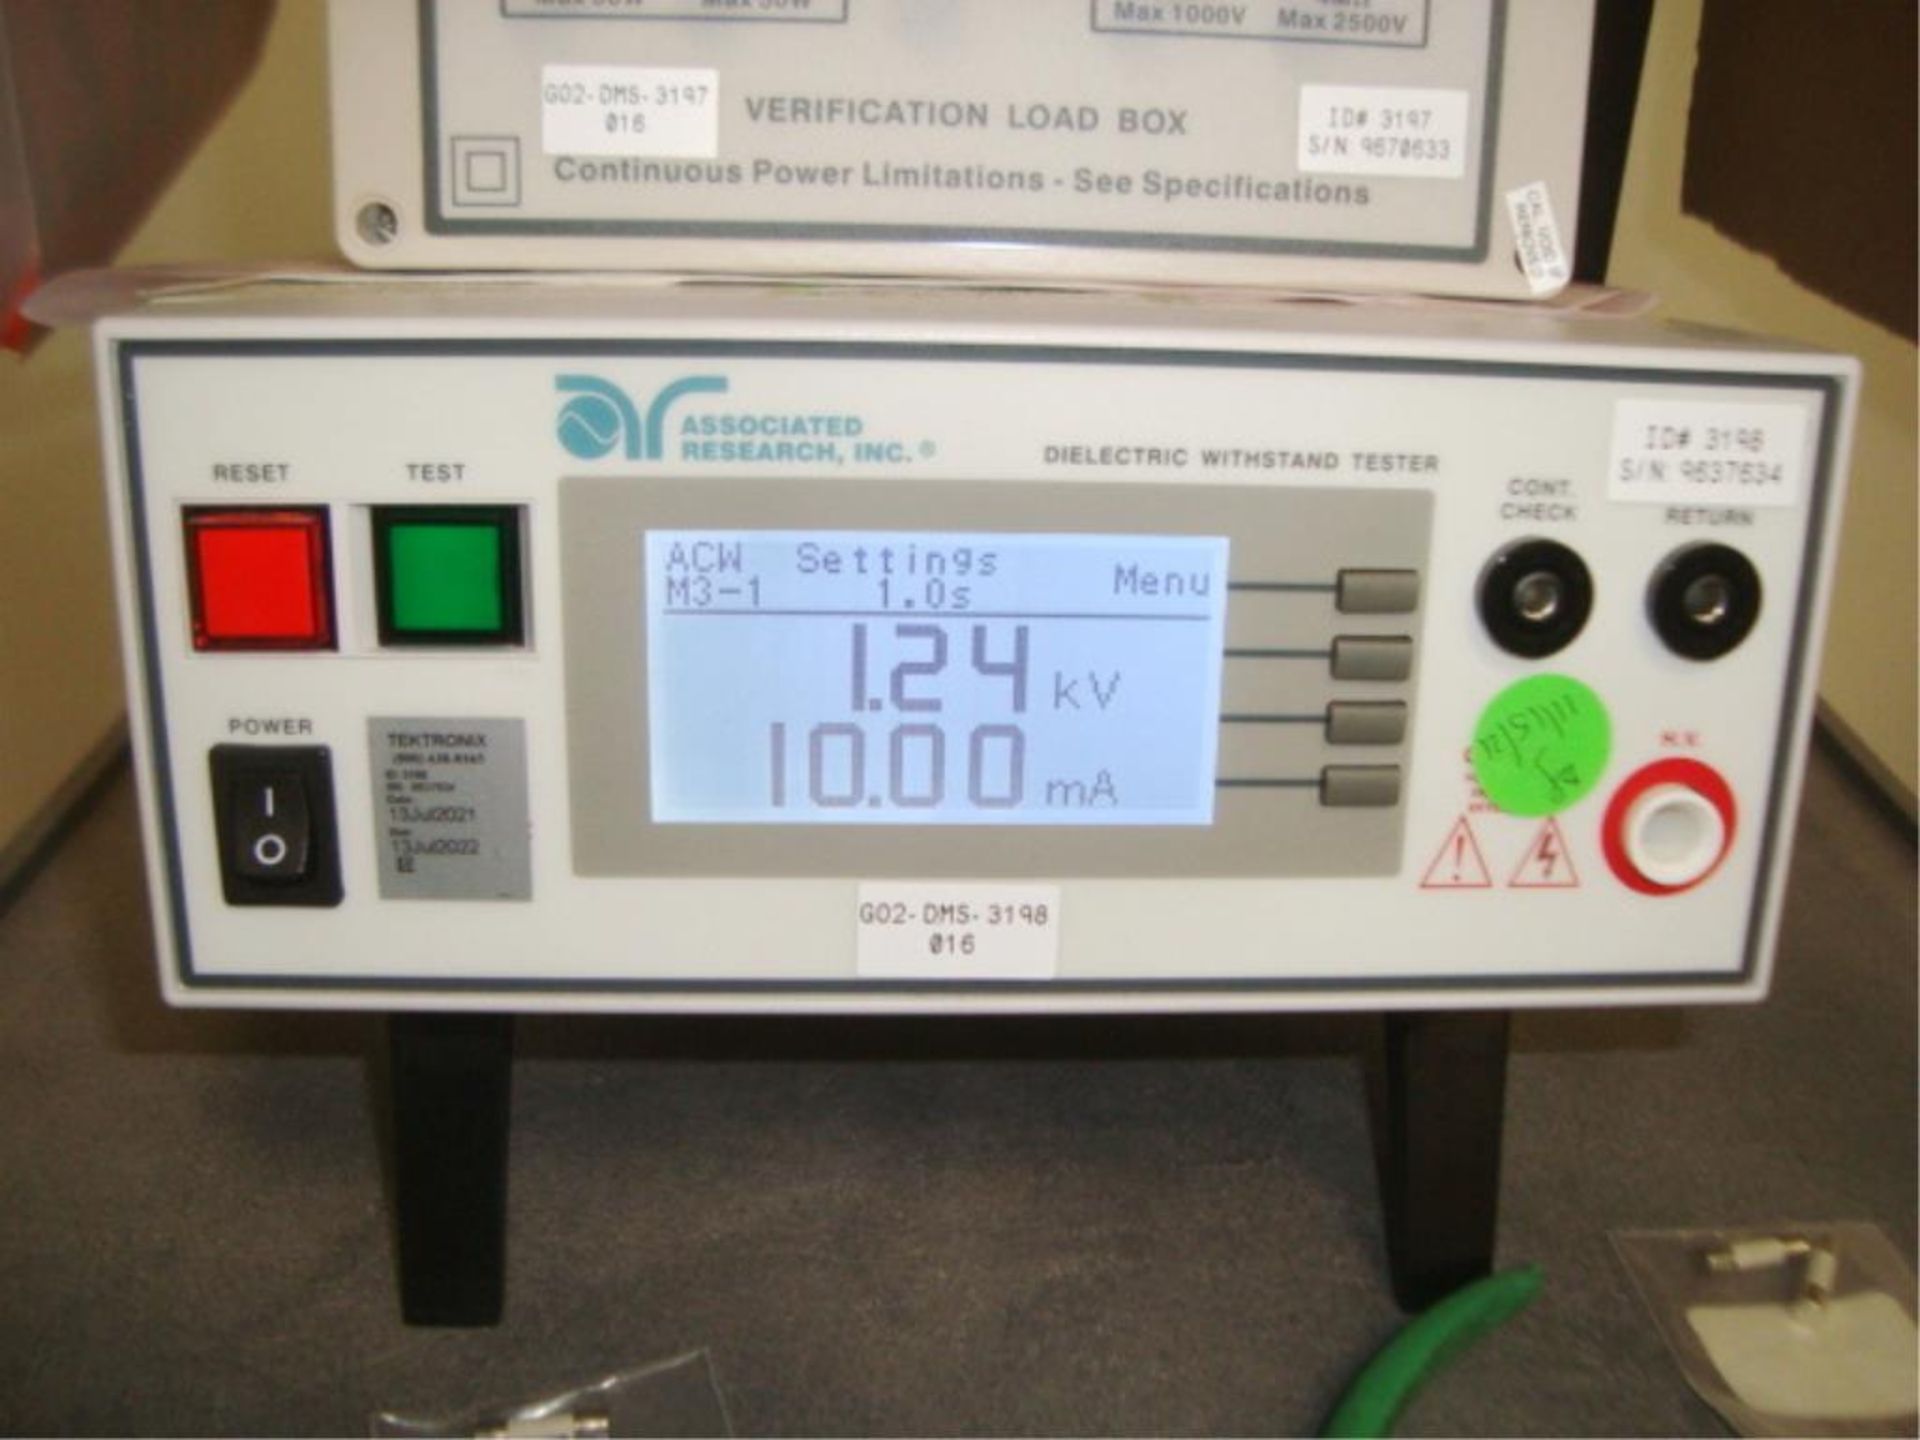 Dielectric Withstand Tester & Verification Load - Image 3 of 7